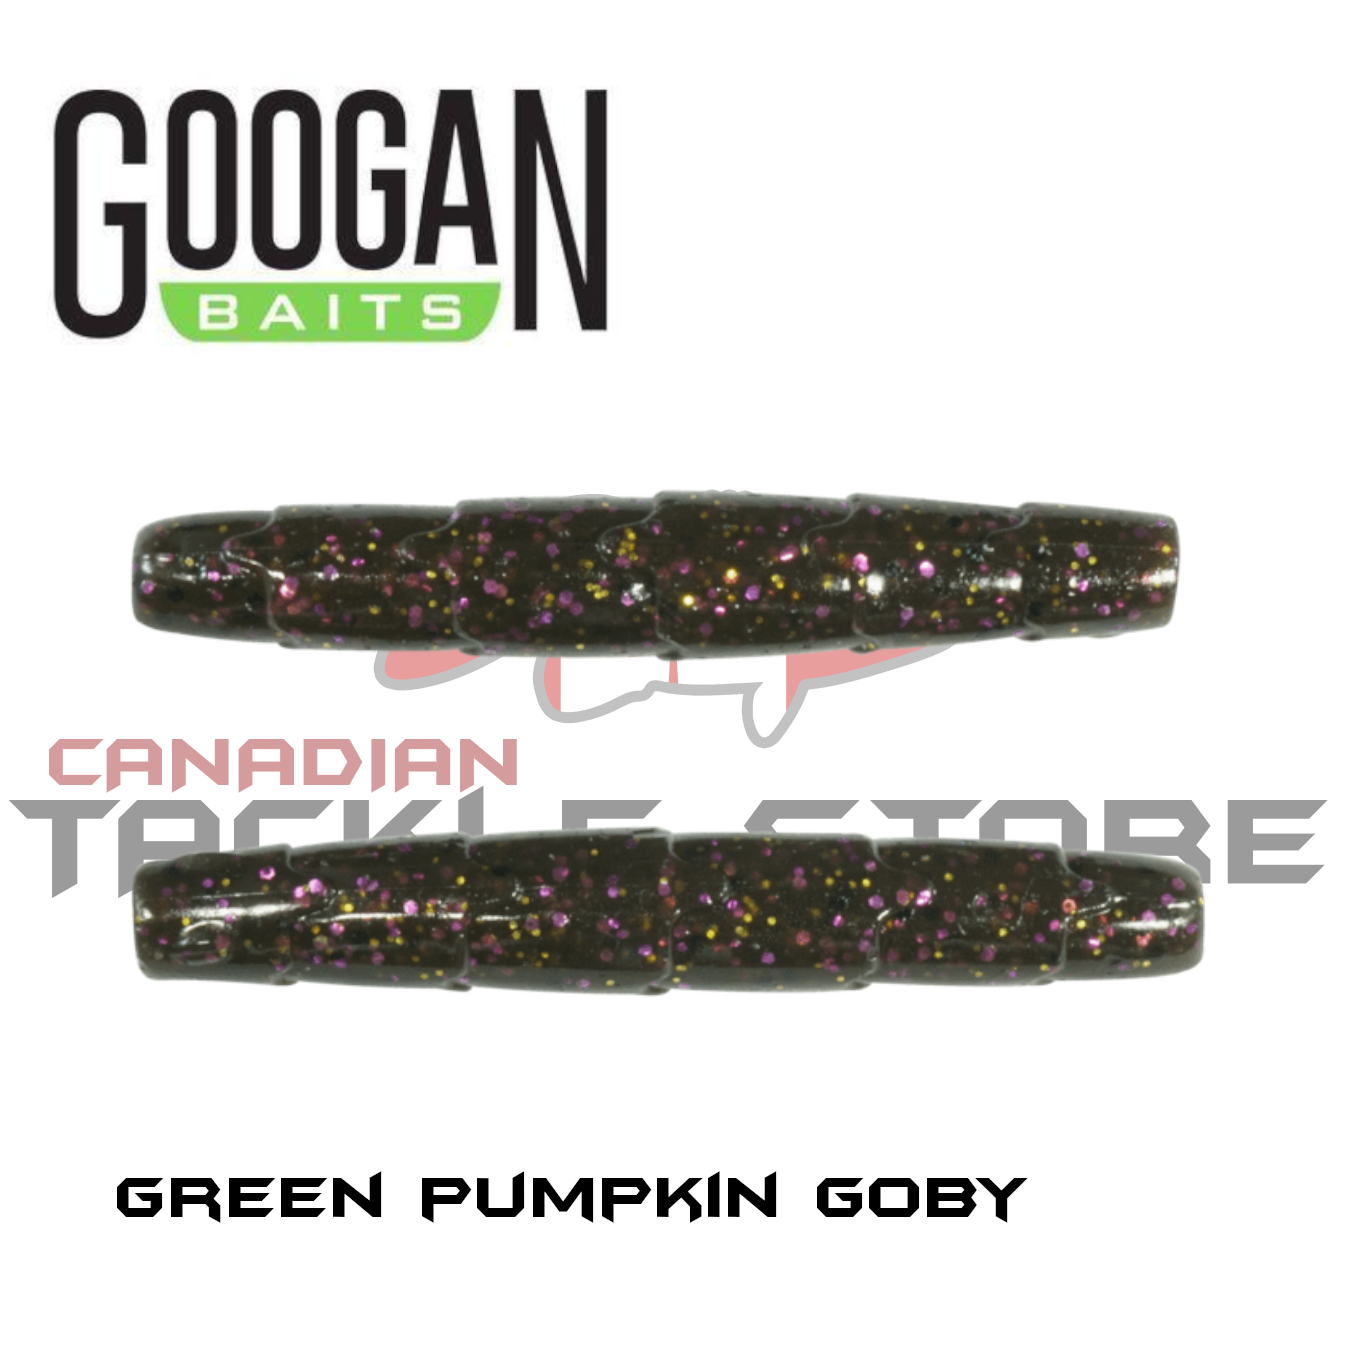 Googan Baits Saucy Swimmer 3.8 – Clearlake Bait & Tackle